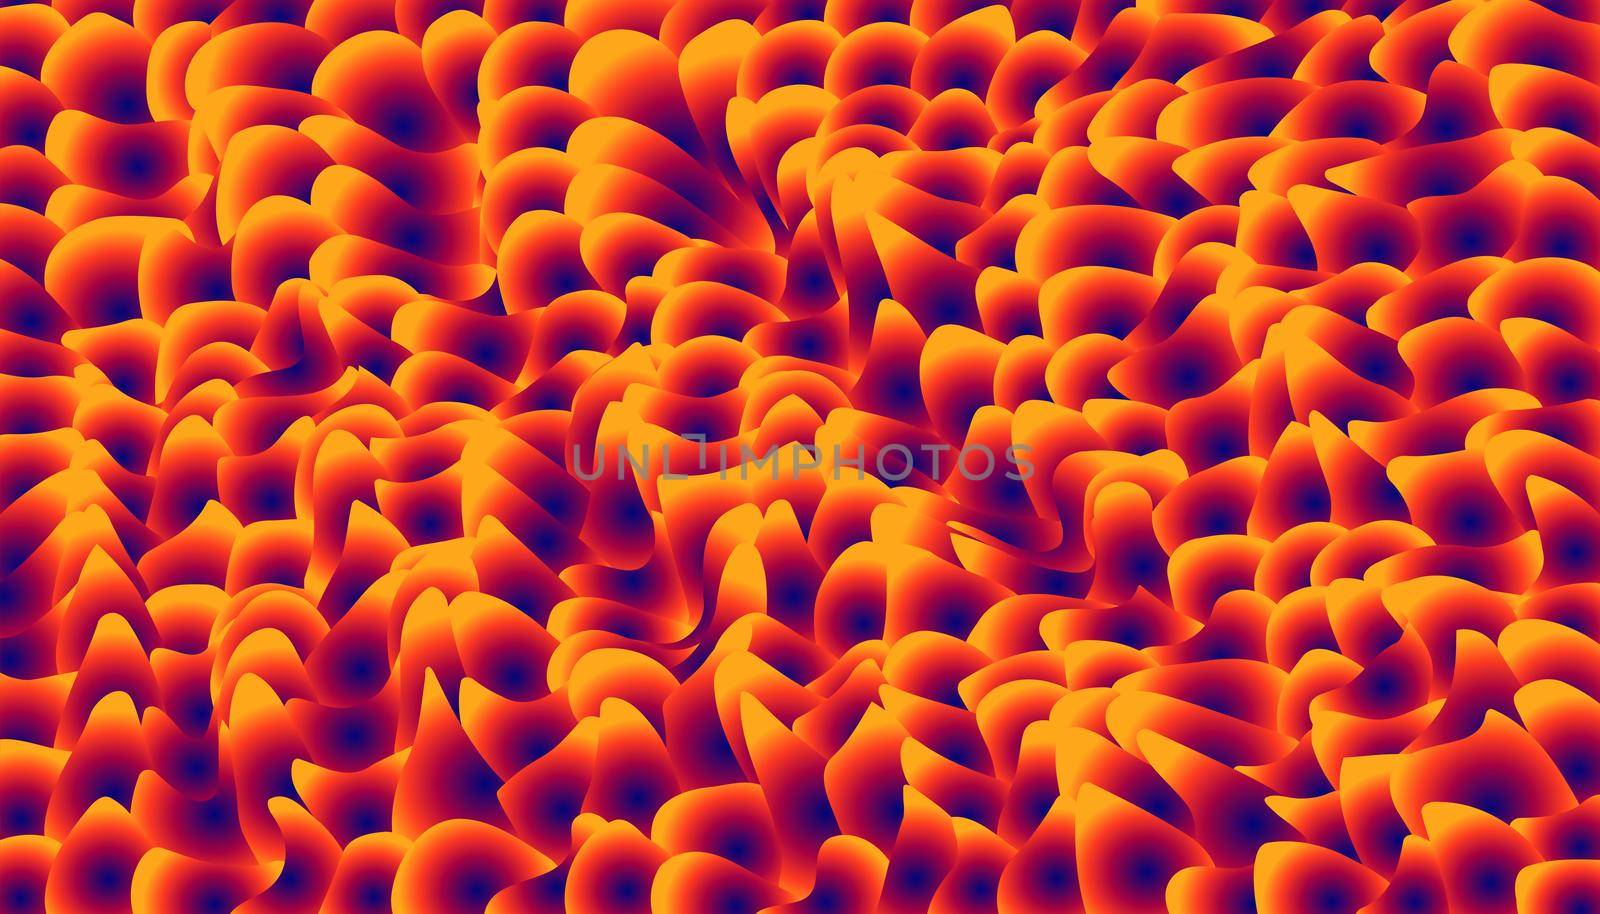 abstract twirl blend small fire flame element. colorful beautiful background design.